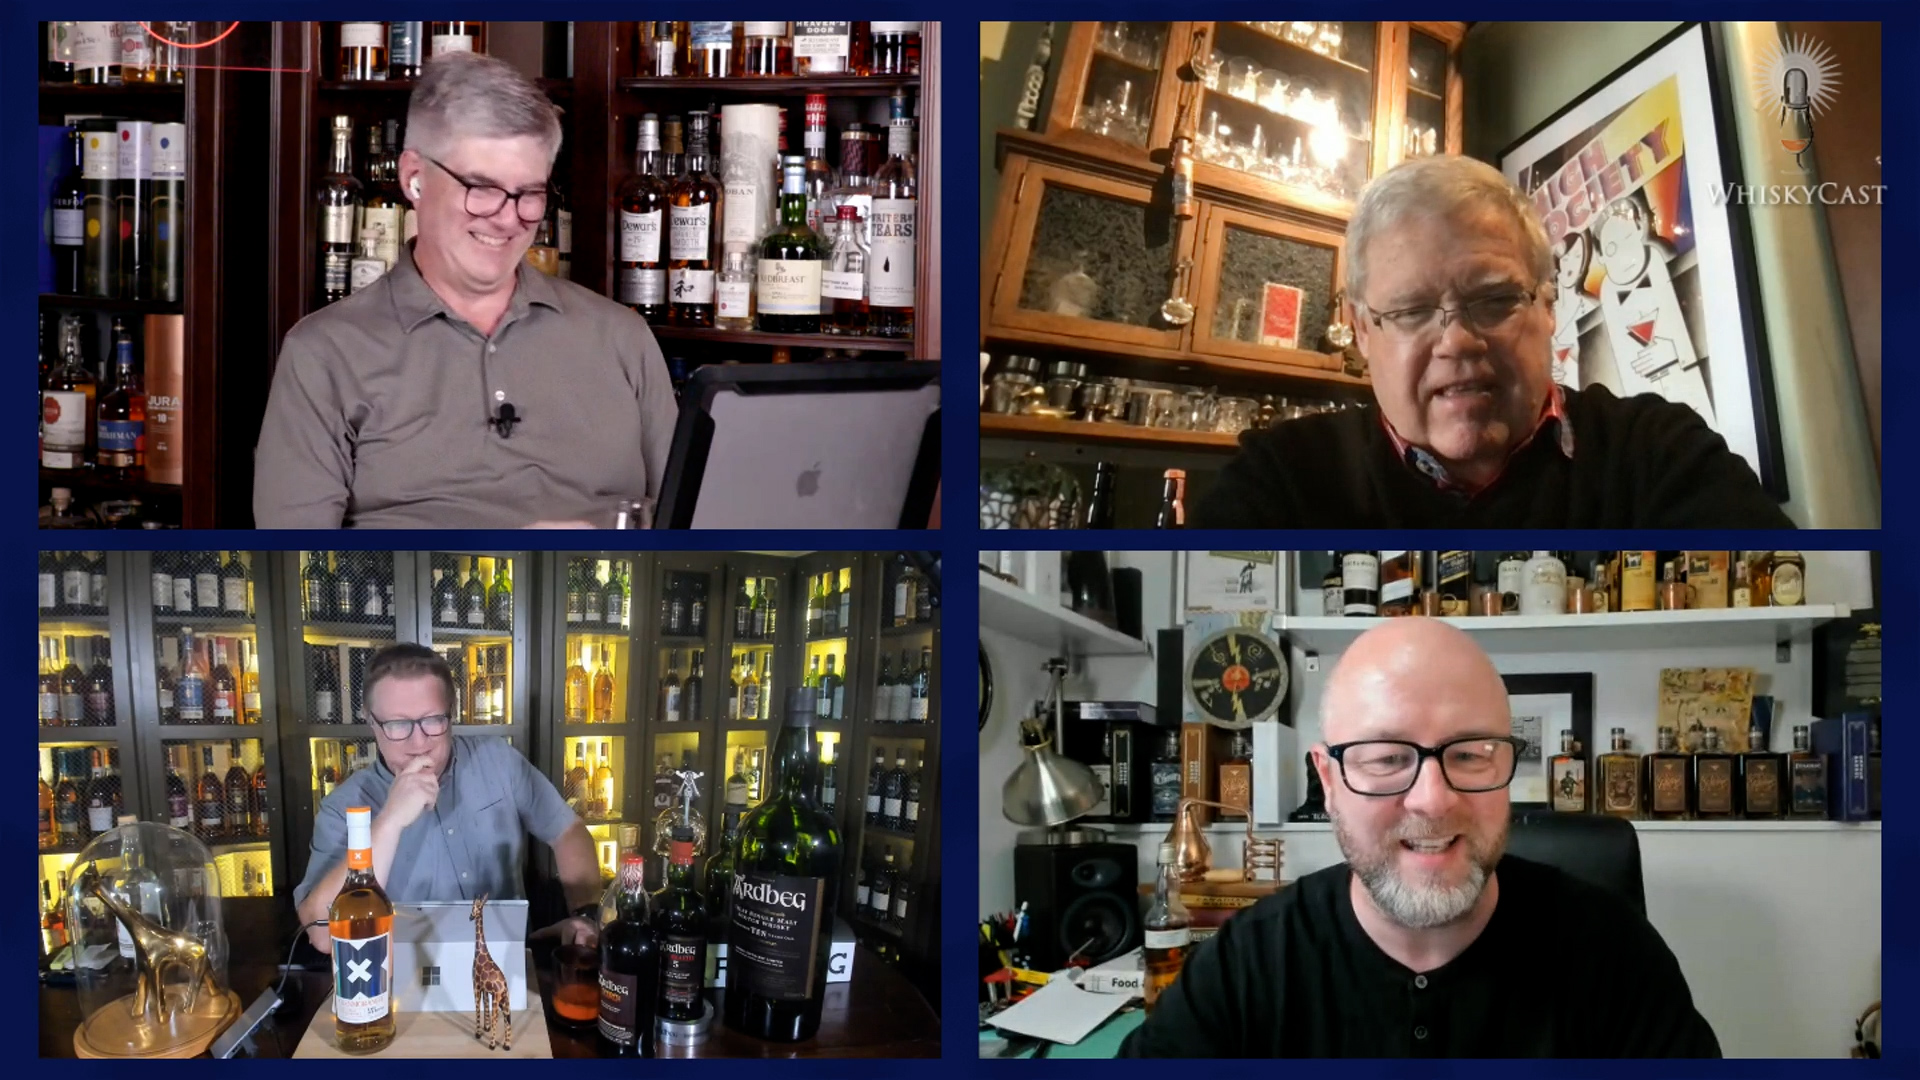 If you missed Friday night's #HappyHourLive webcast with our guests Steve Beal, Ewan Morgan, David Blackmore, and Owen Martin of Stranahan's...the on-demand replay is available now at the WhiskyCast YouTube channel! We'll have the podcast version out mid-week, too.